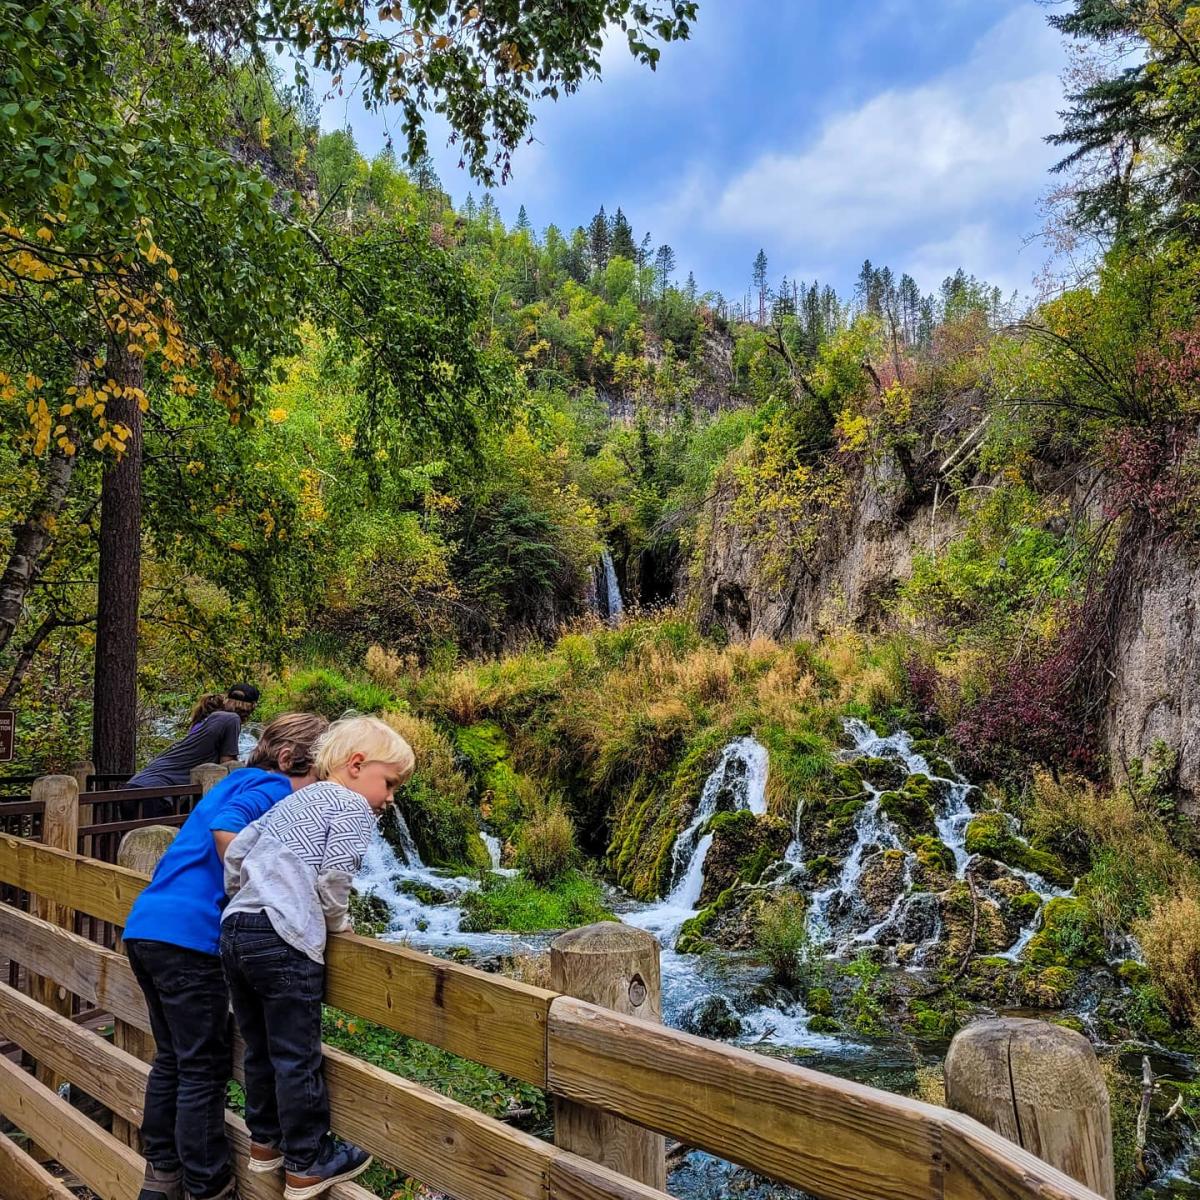 kids on the railing overlooking roughlough falls in spearfish canyon in south dakota